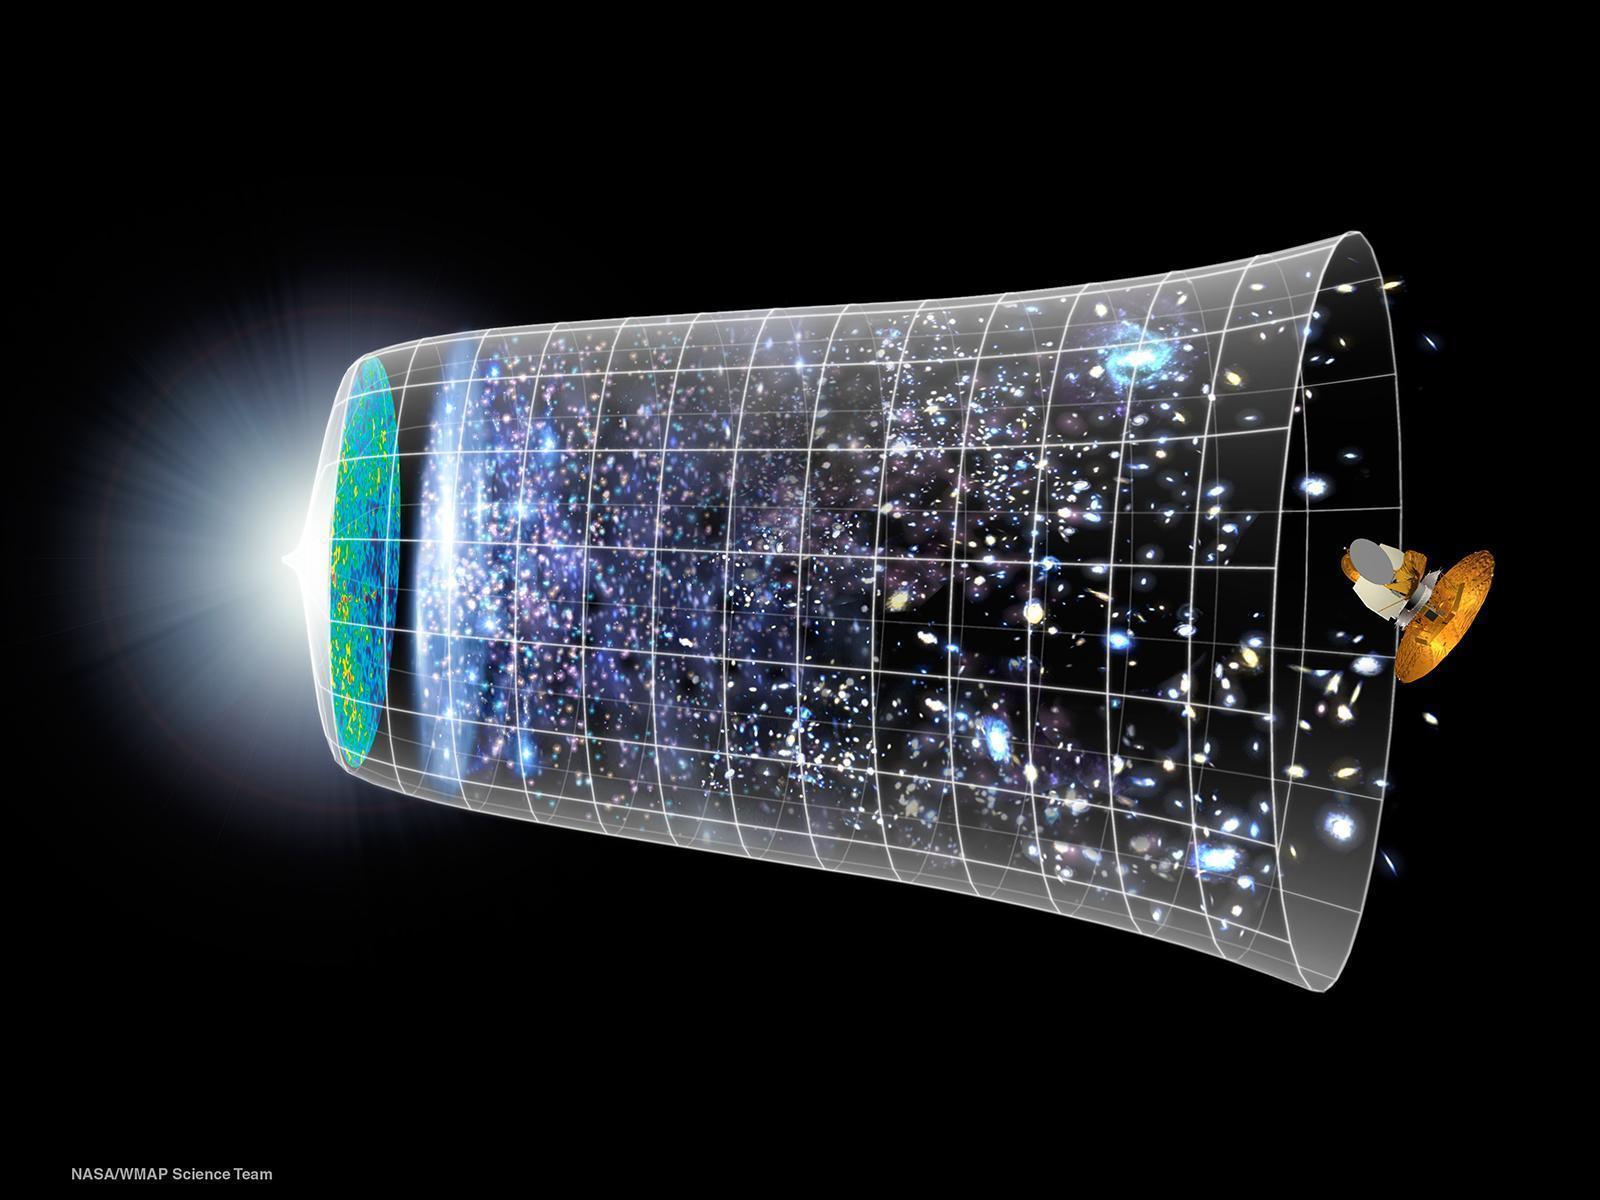 Timeline of the Universe Image